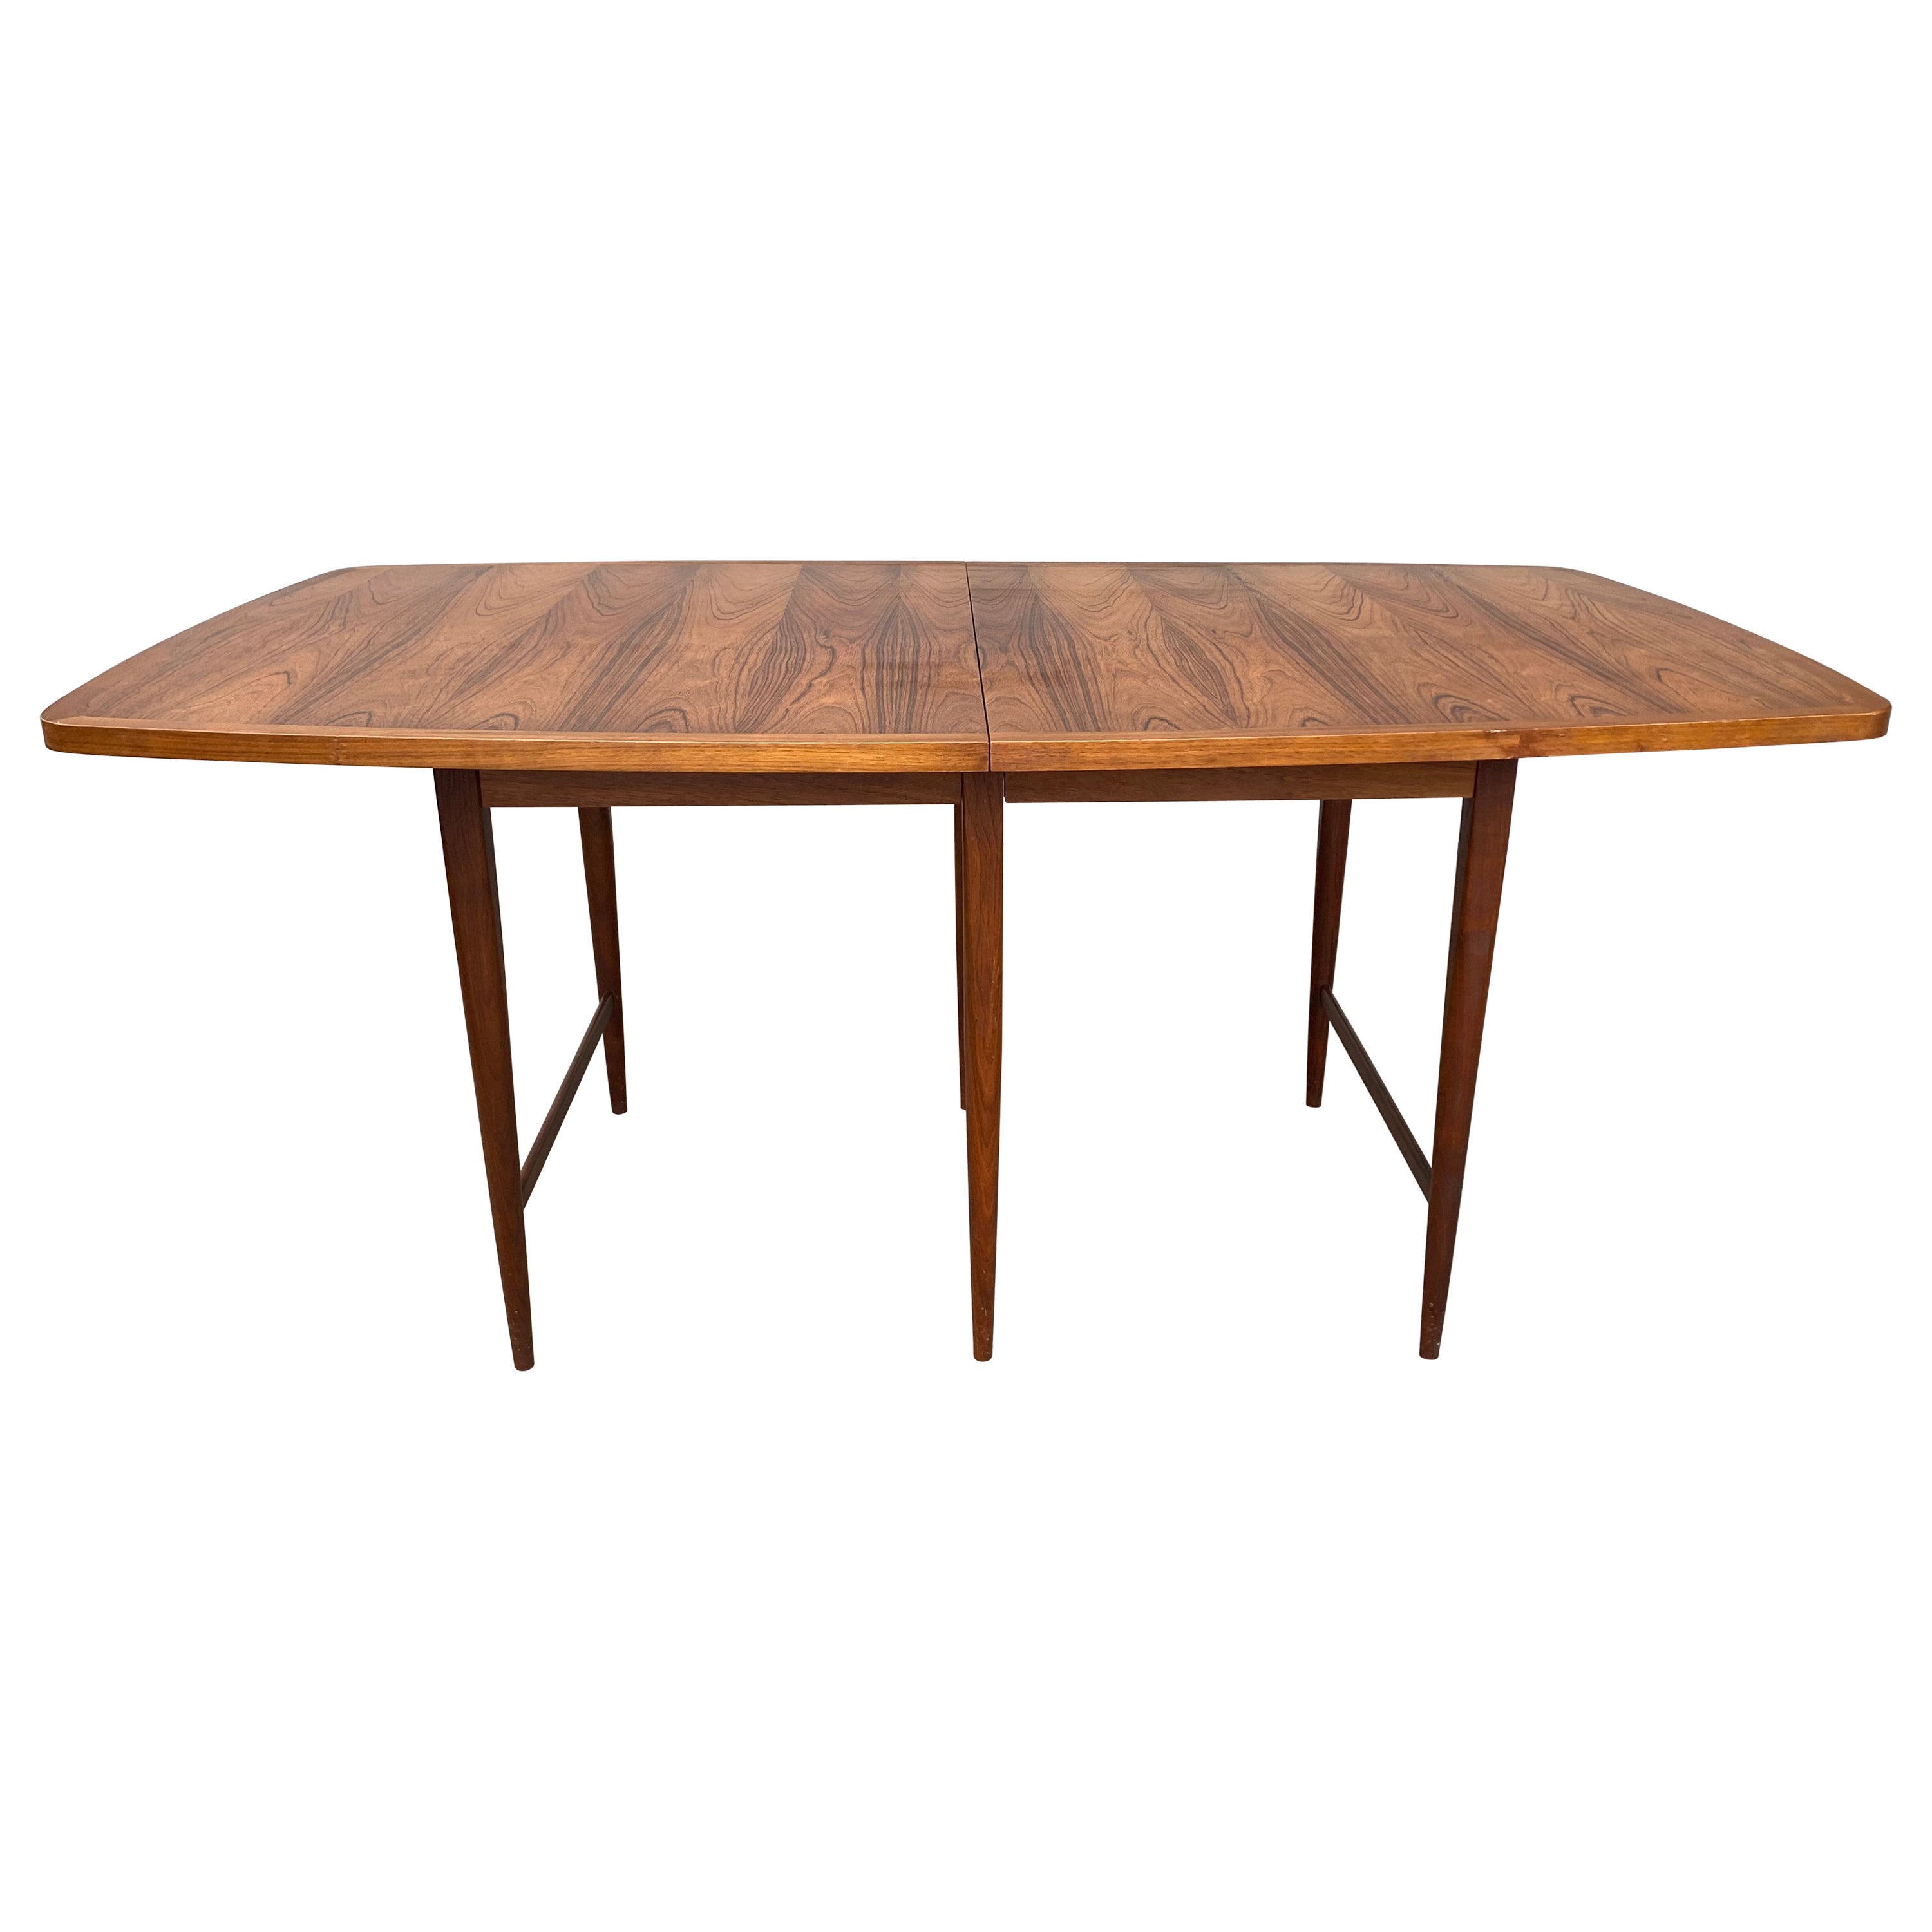 Modernist Rosewood Dining Table "Delineator" Designed by Paul McCobb